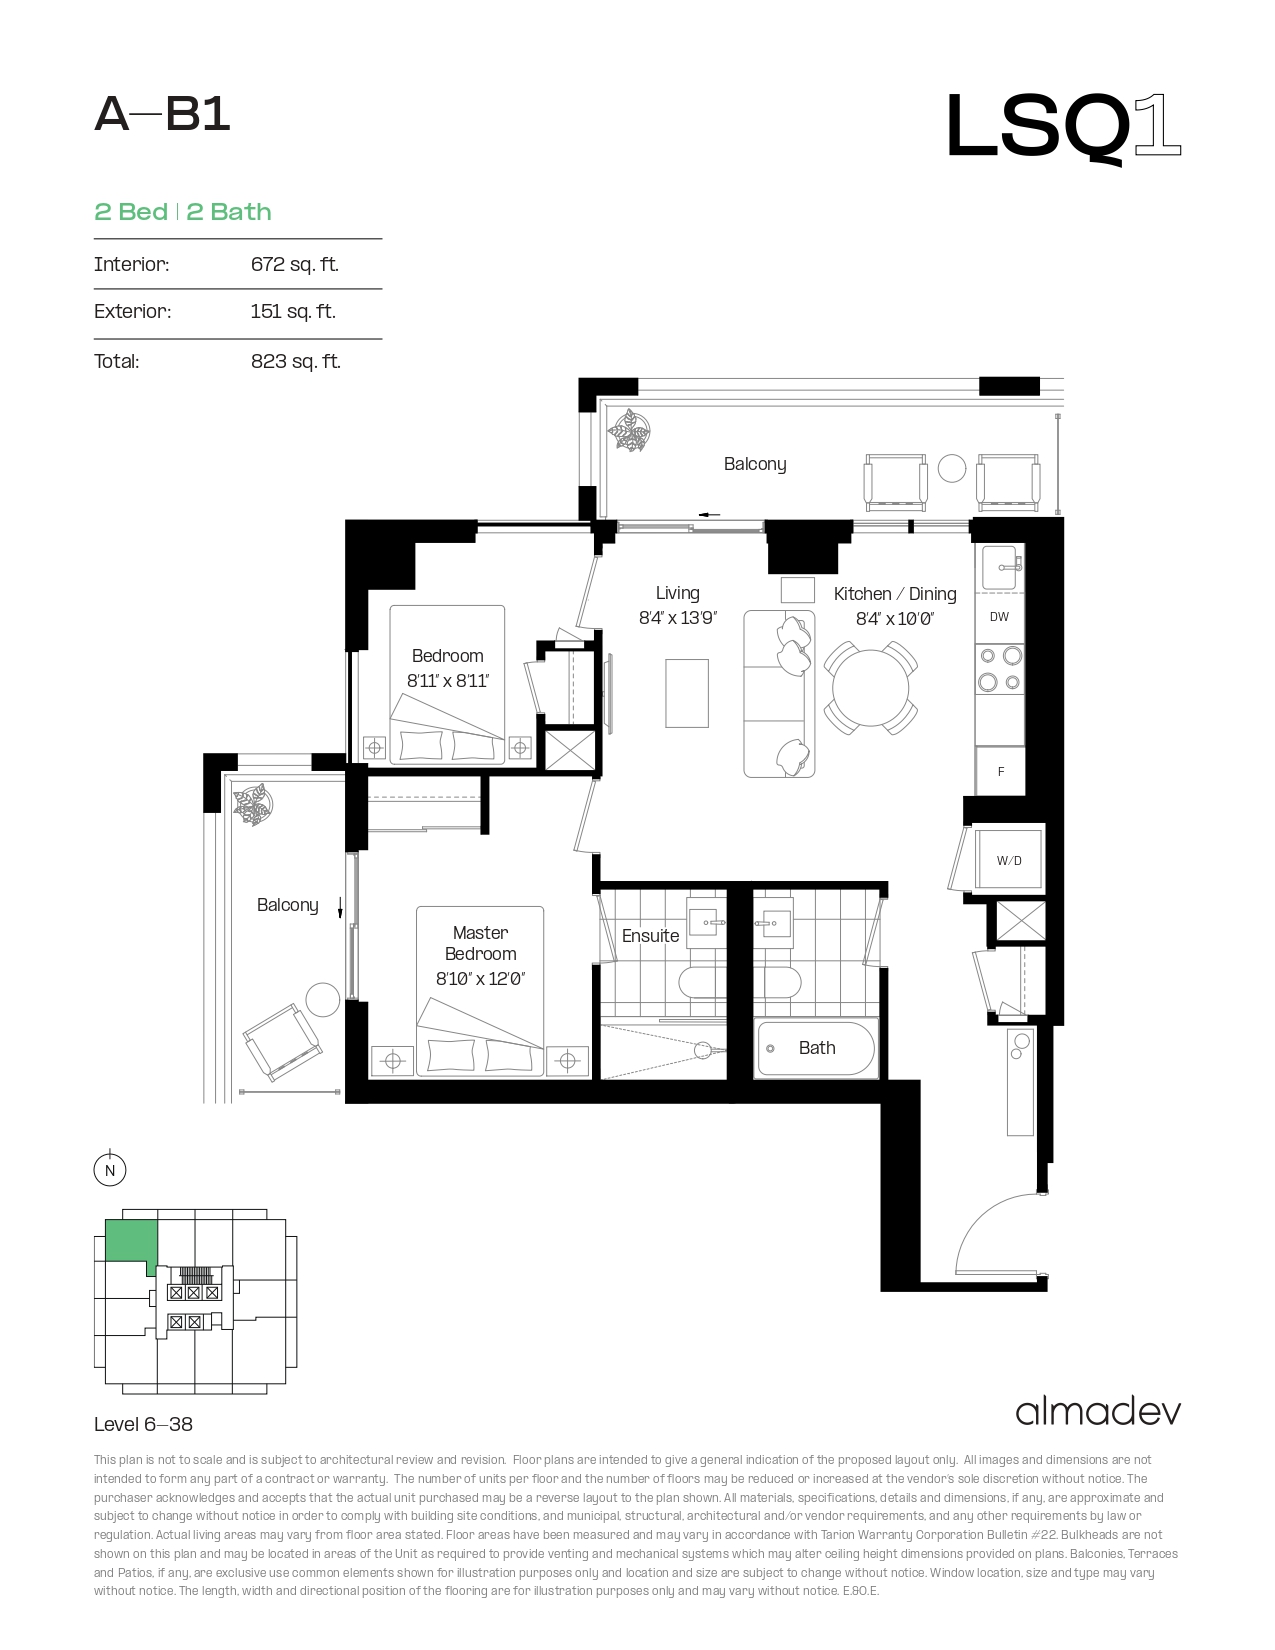 A-B1 Floor Plan of LSQ Condos with undefined beds